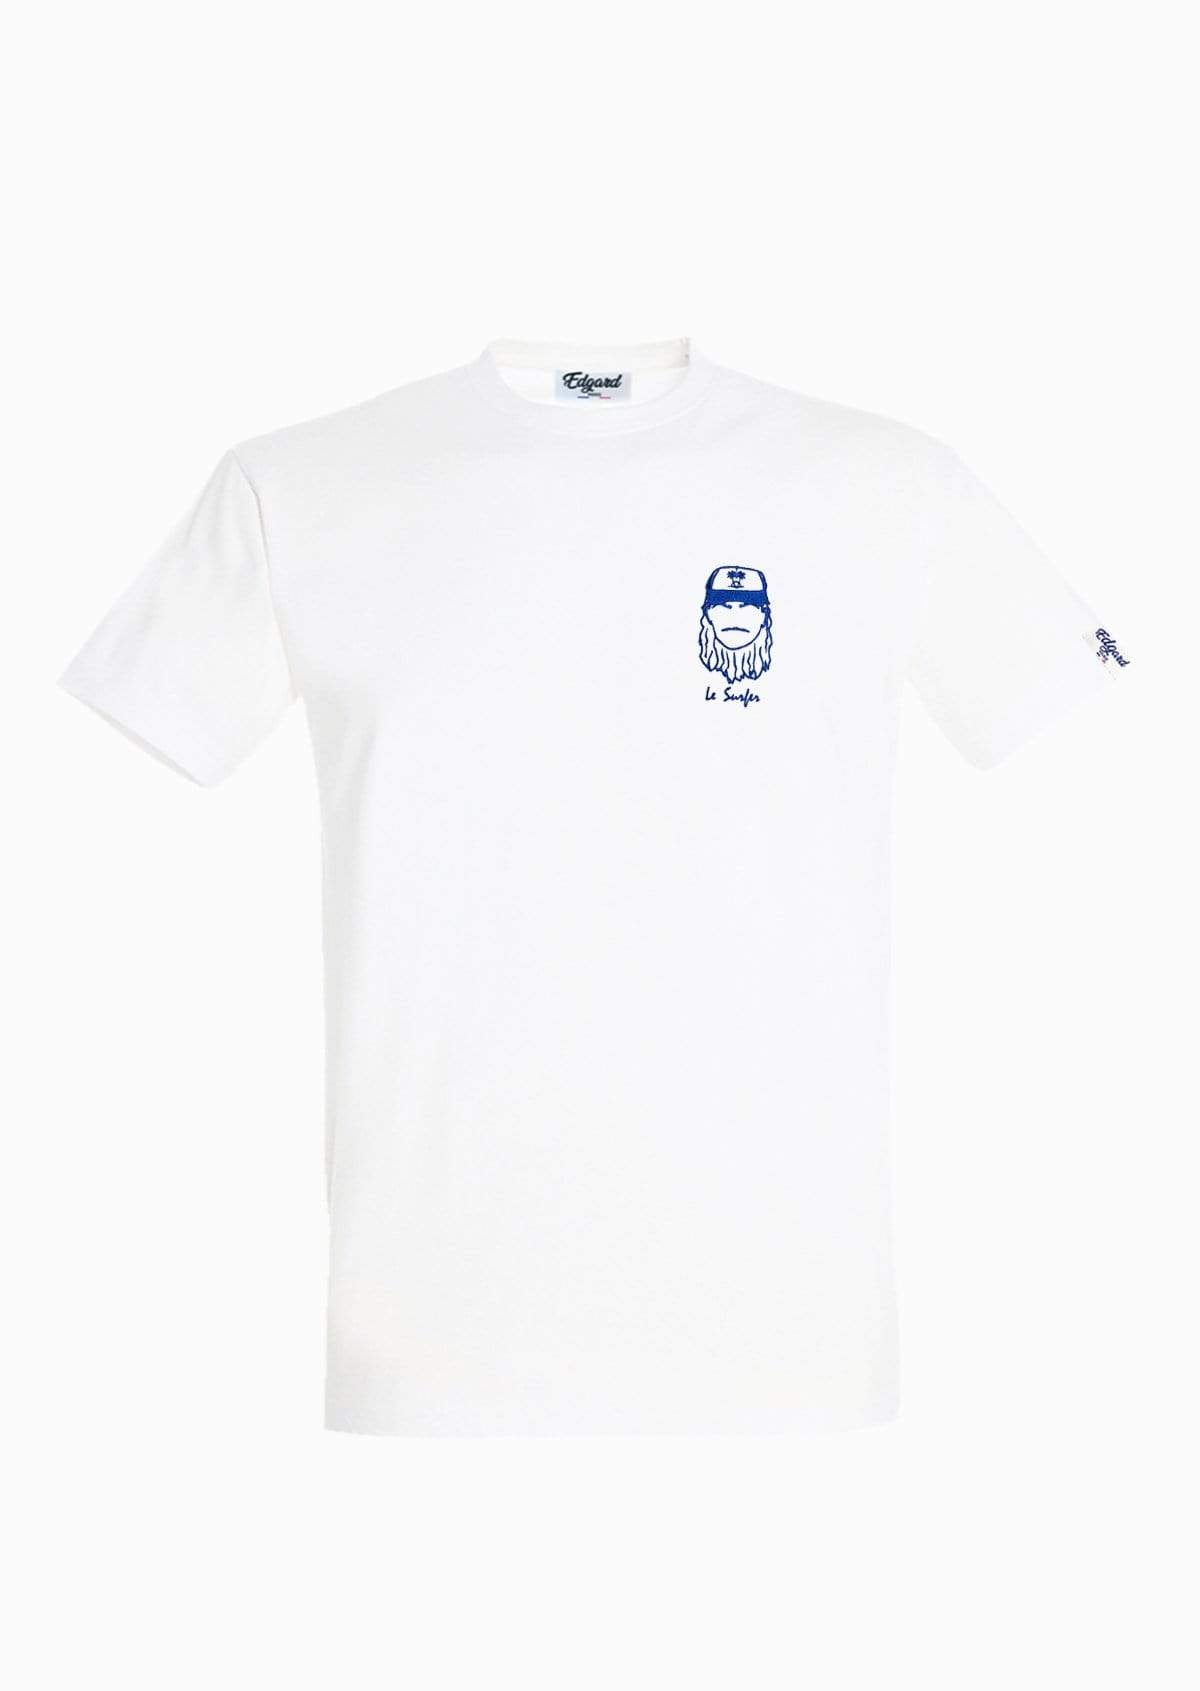 Edgard - White T Shirt - Le Surfer (The Surfer) - The Good Chic